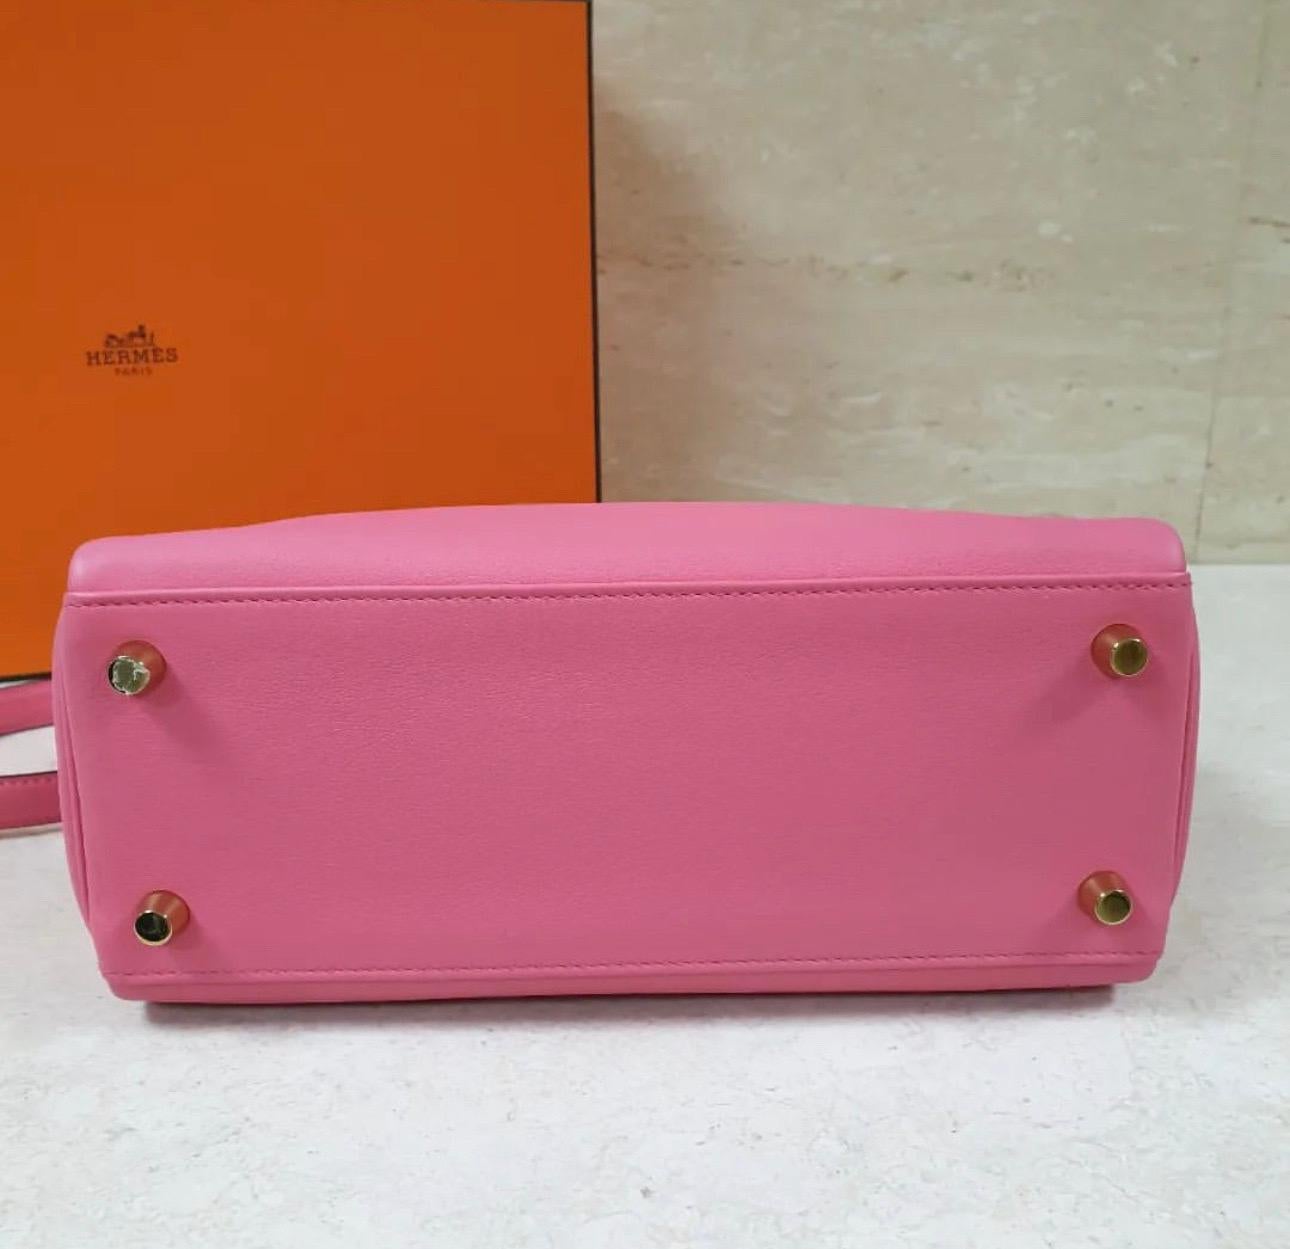 Hermes Kelly 25 Rose Leather Bag In Good Condition For Sale In Krakow, PL